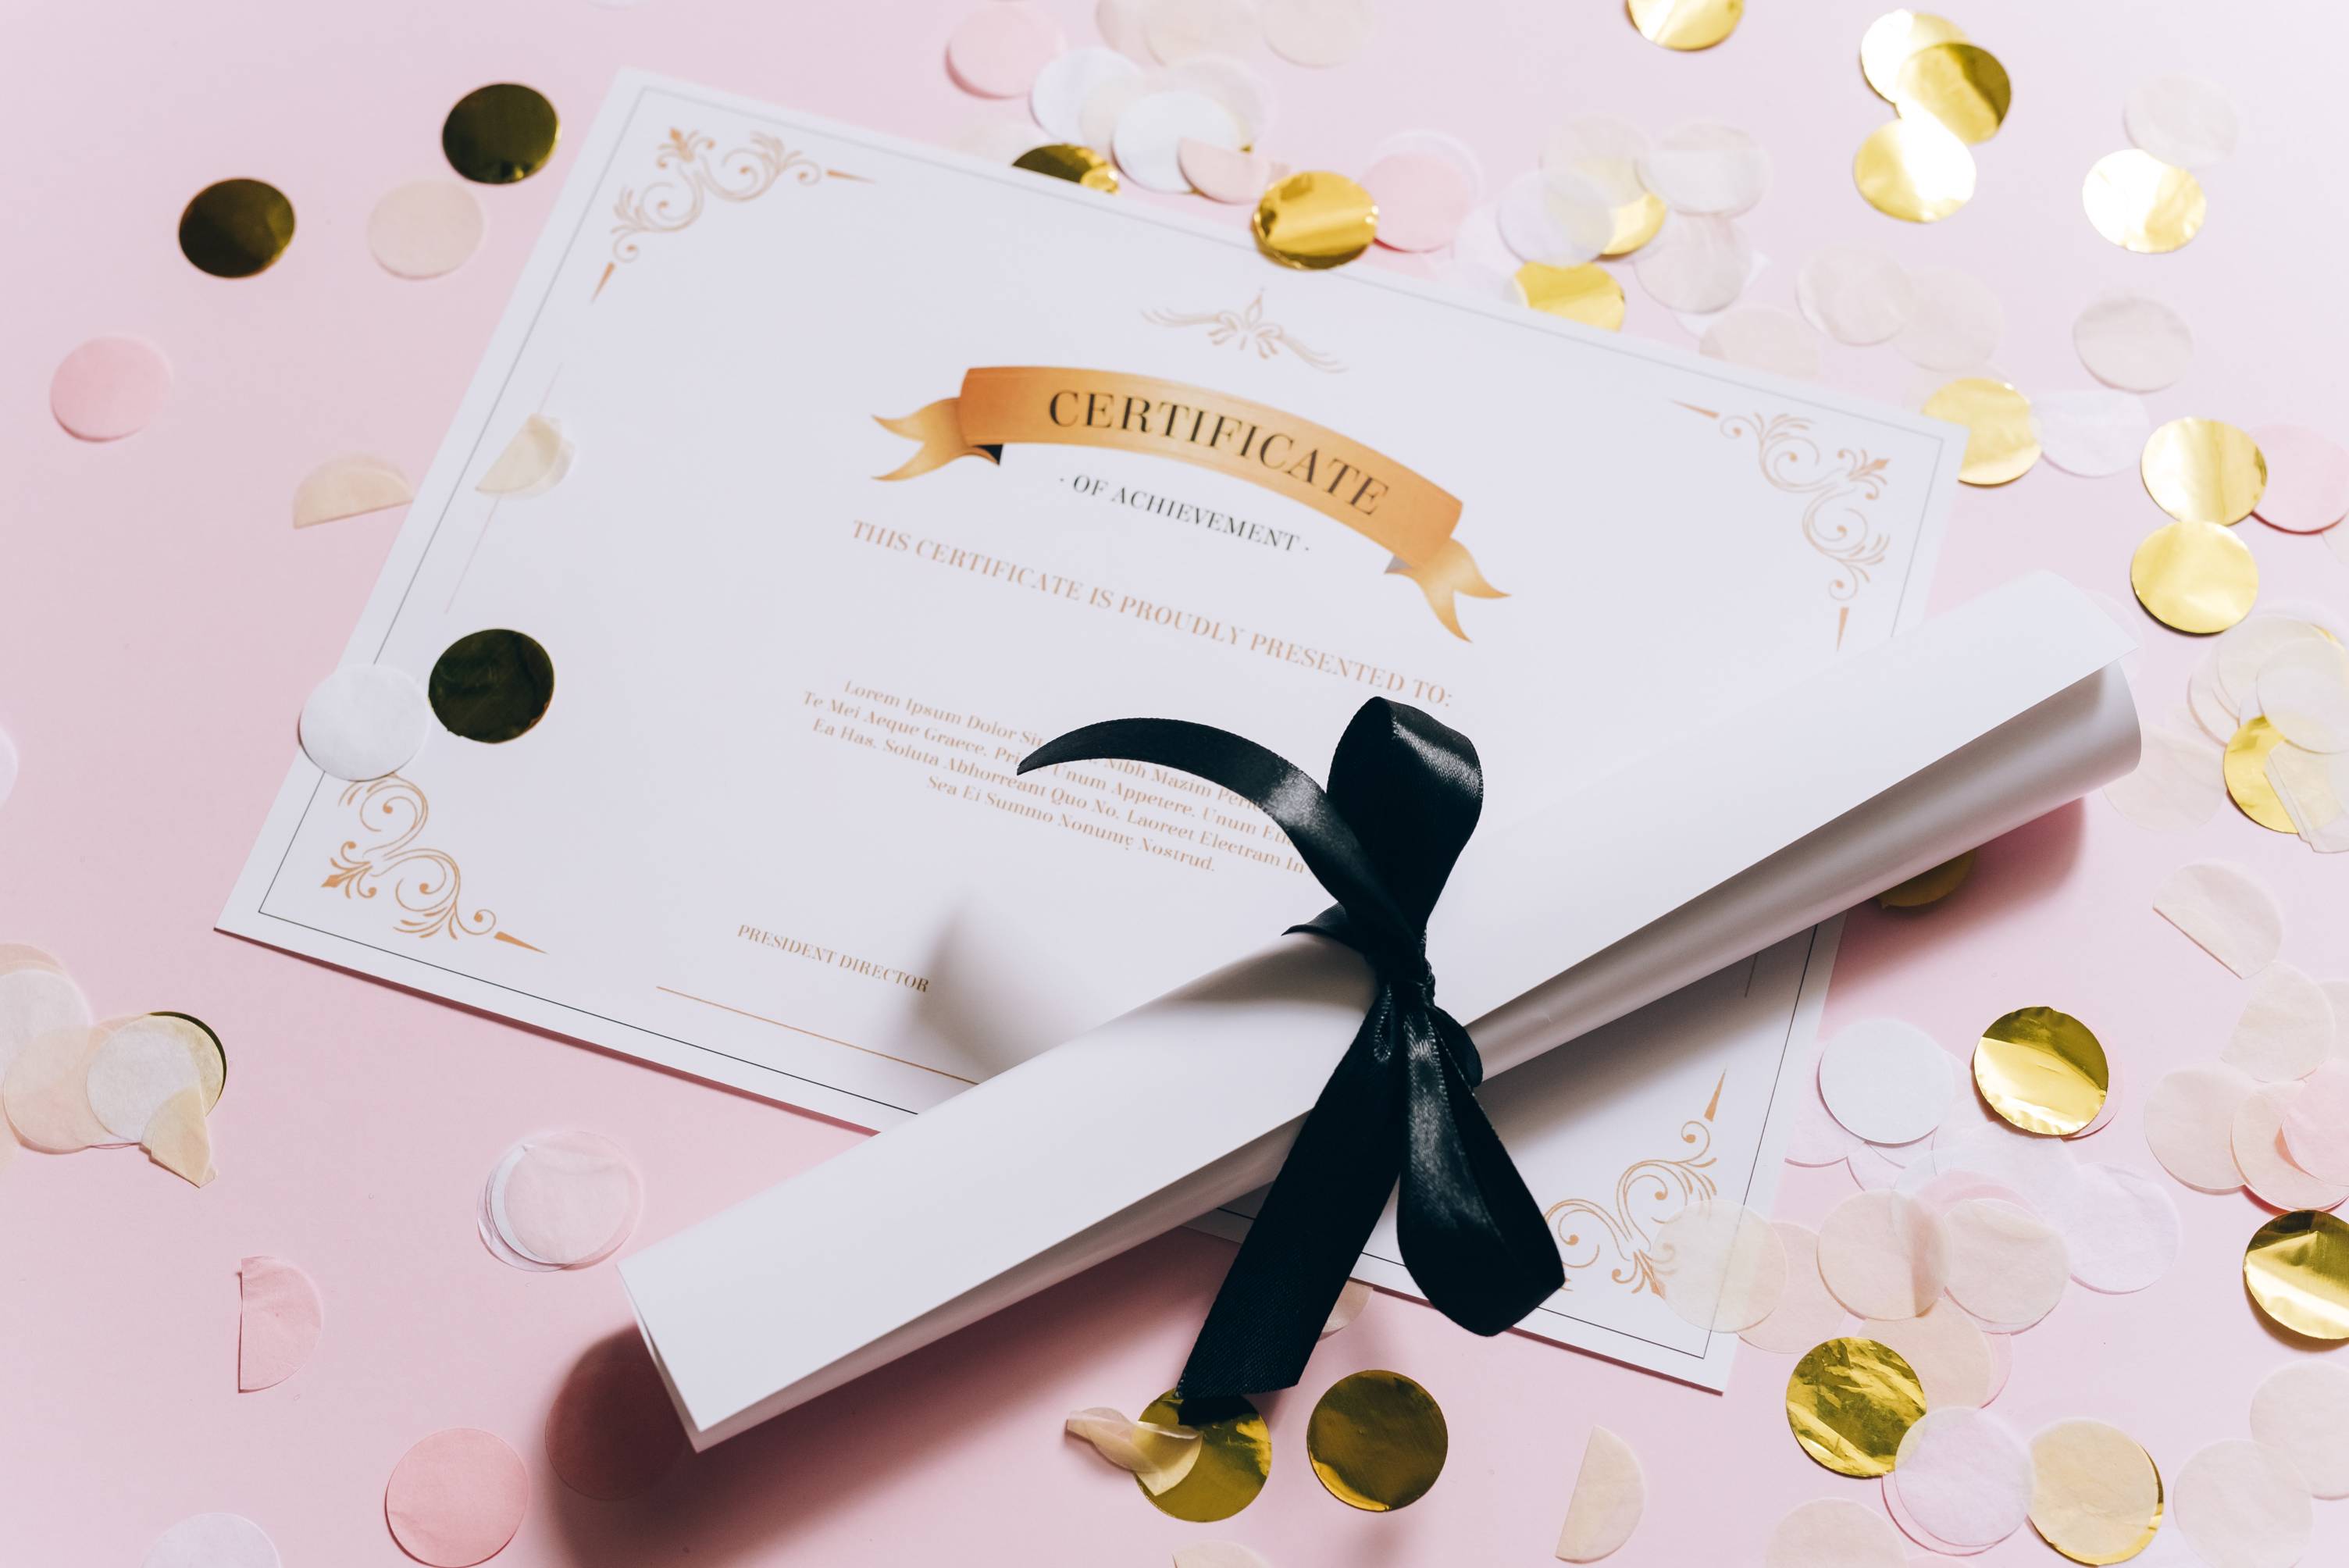 Certificate and scroll tied with ribbon on pink background